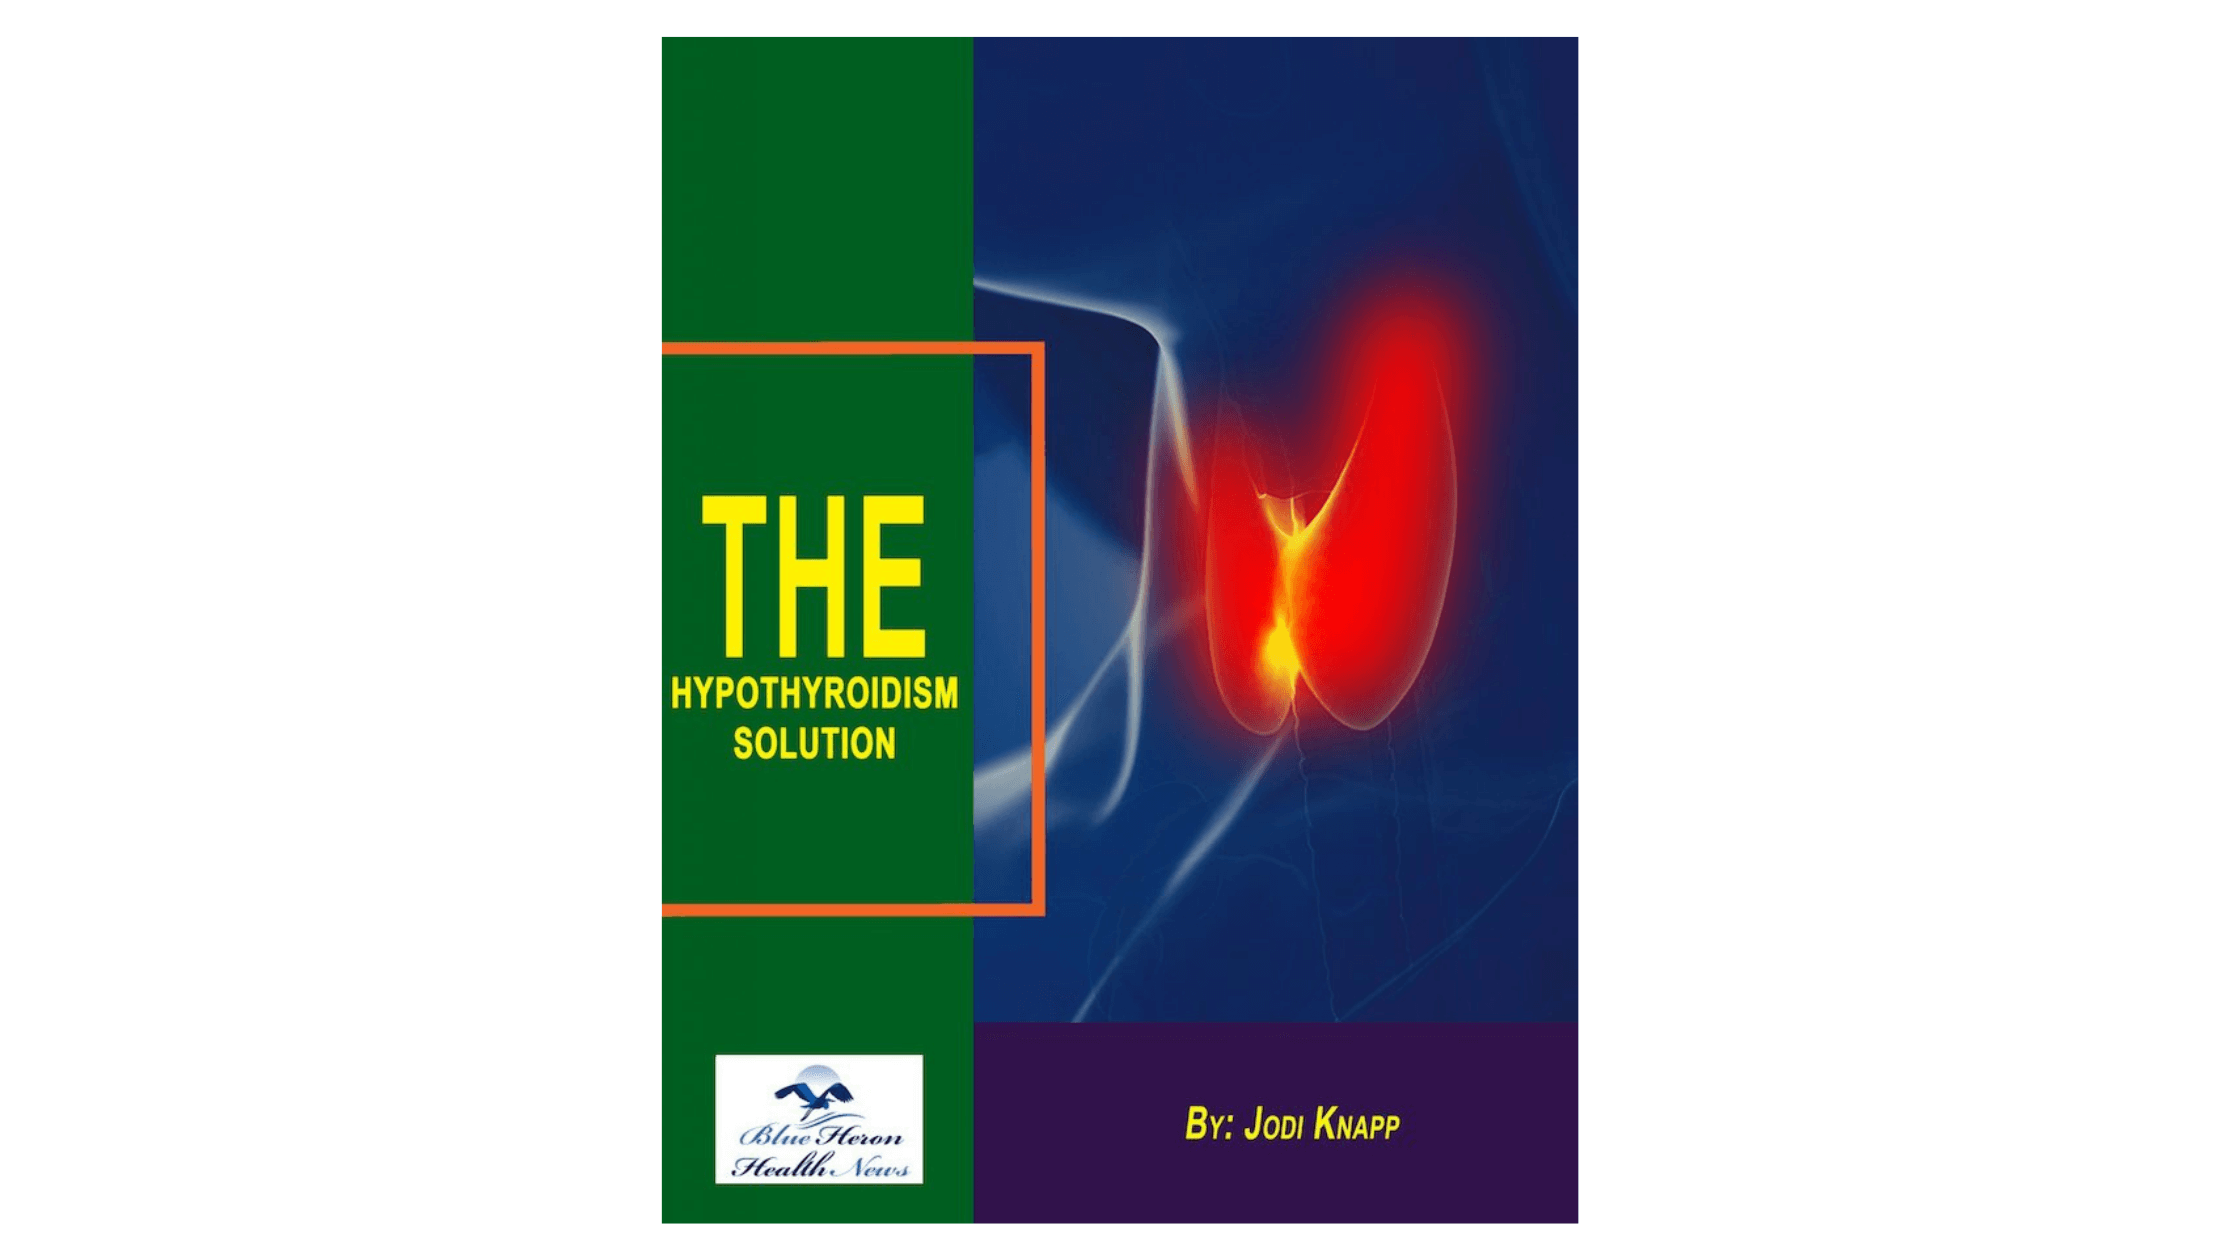 The Hypothyroidism Solution Reviews